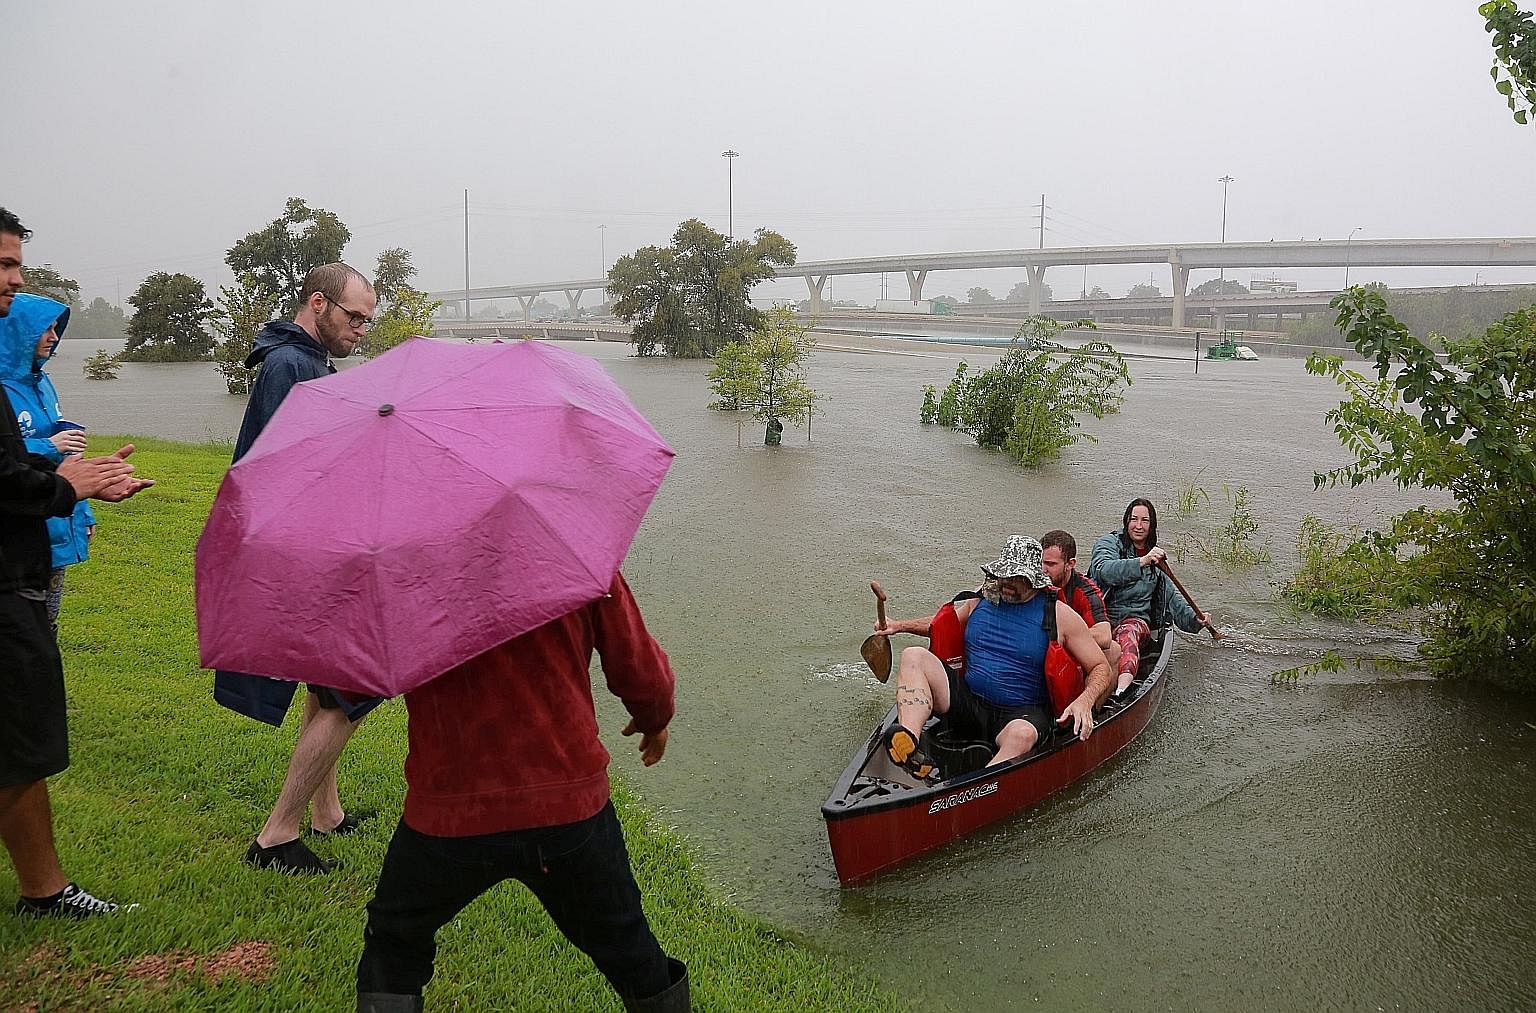 Residents using a kayak to rescue motorists stranded on a highway that was submerged amid widespread flooding caused by Hurricane Harvey last month in Houston, Texas. It took a flooding crisis, says the writer, to join people into one interconnected,